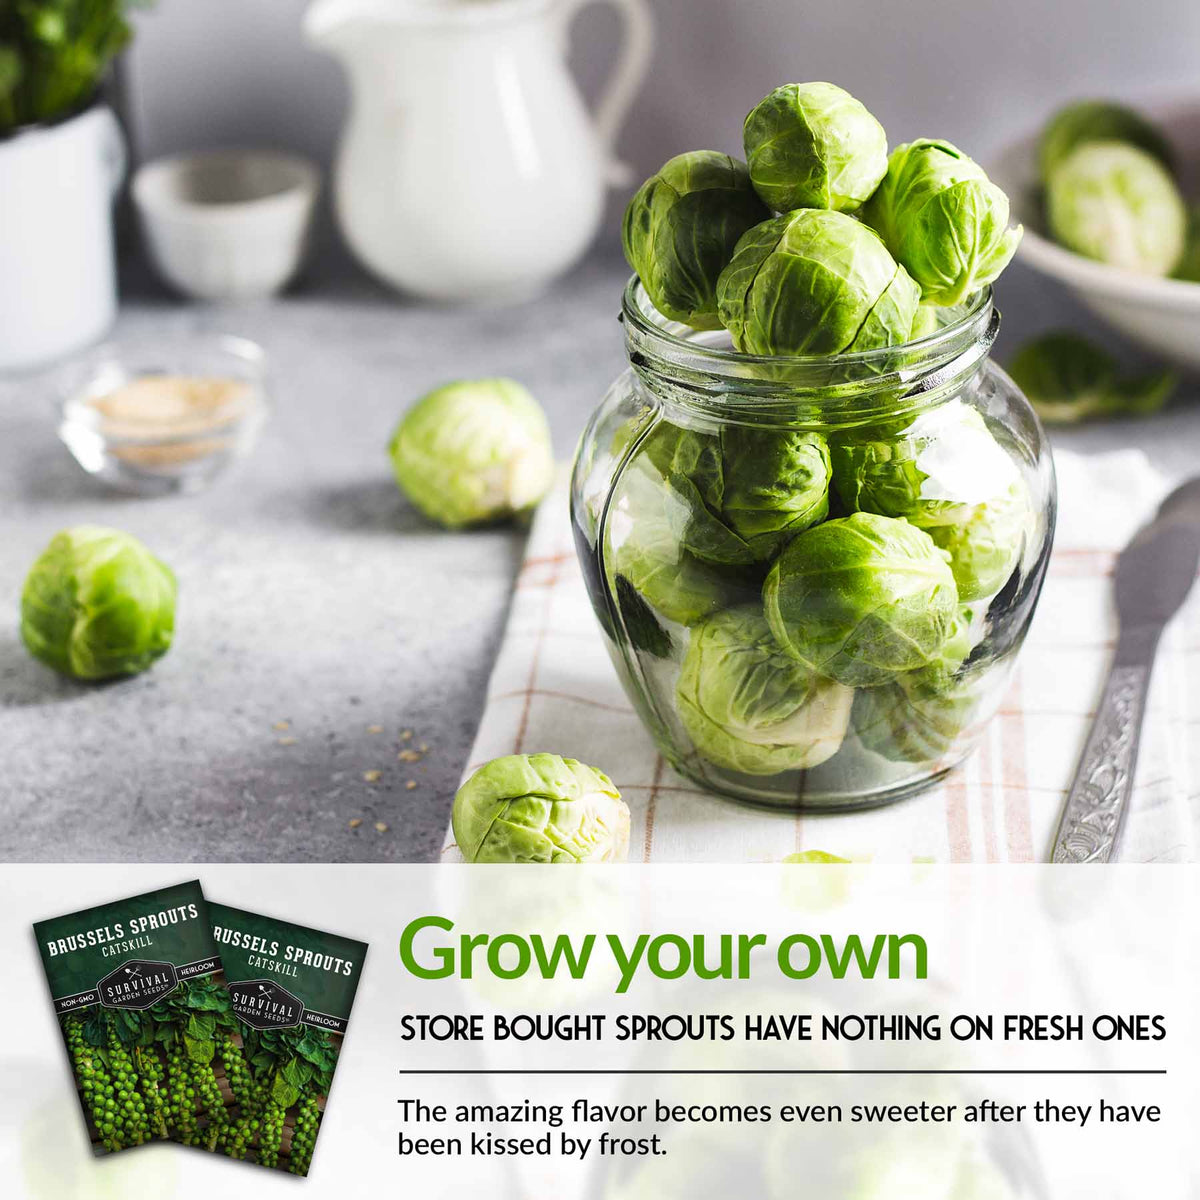 Grow your own brussels sprouts